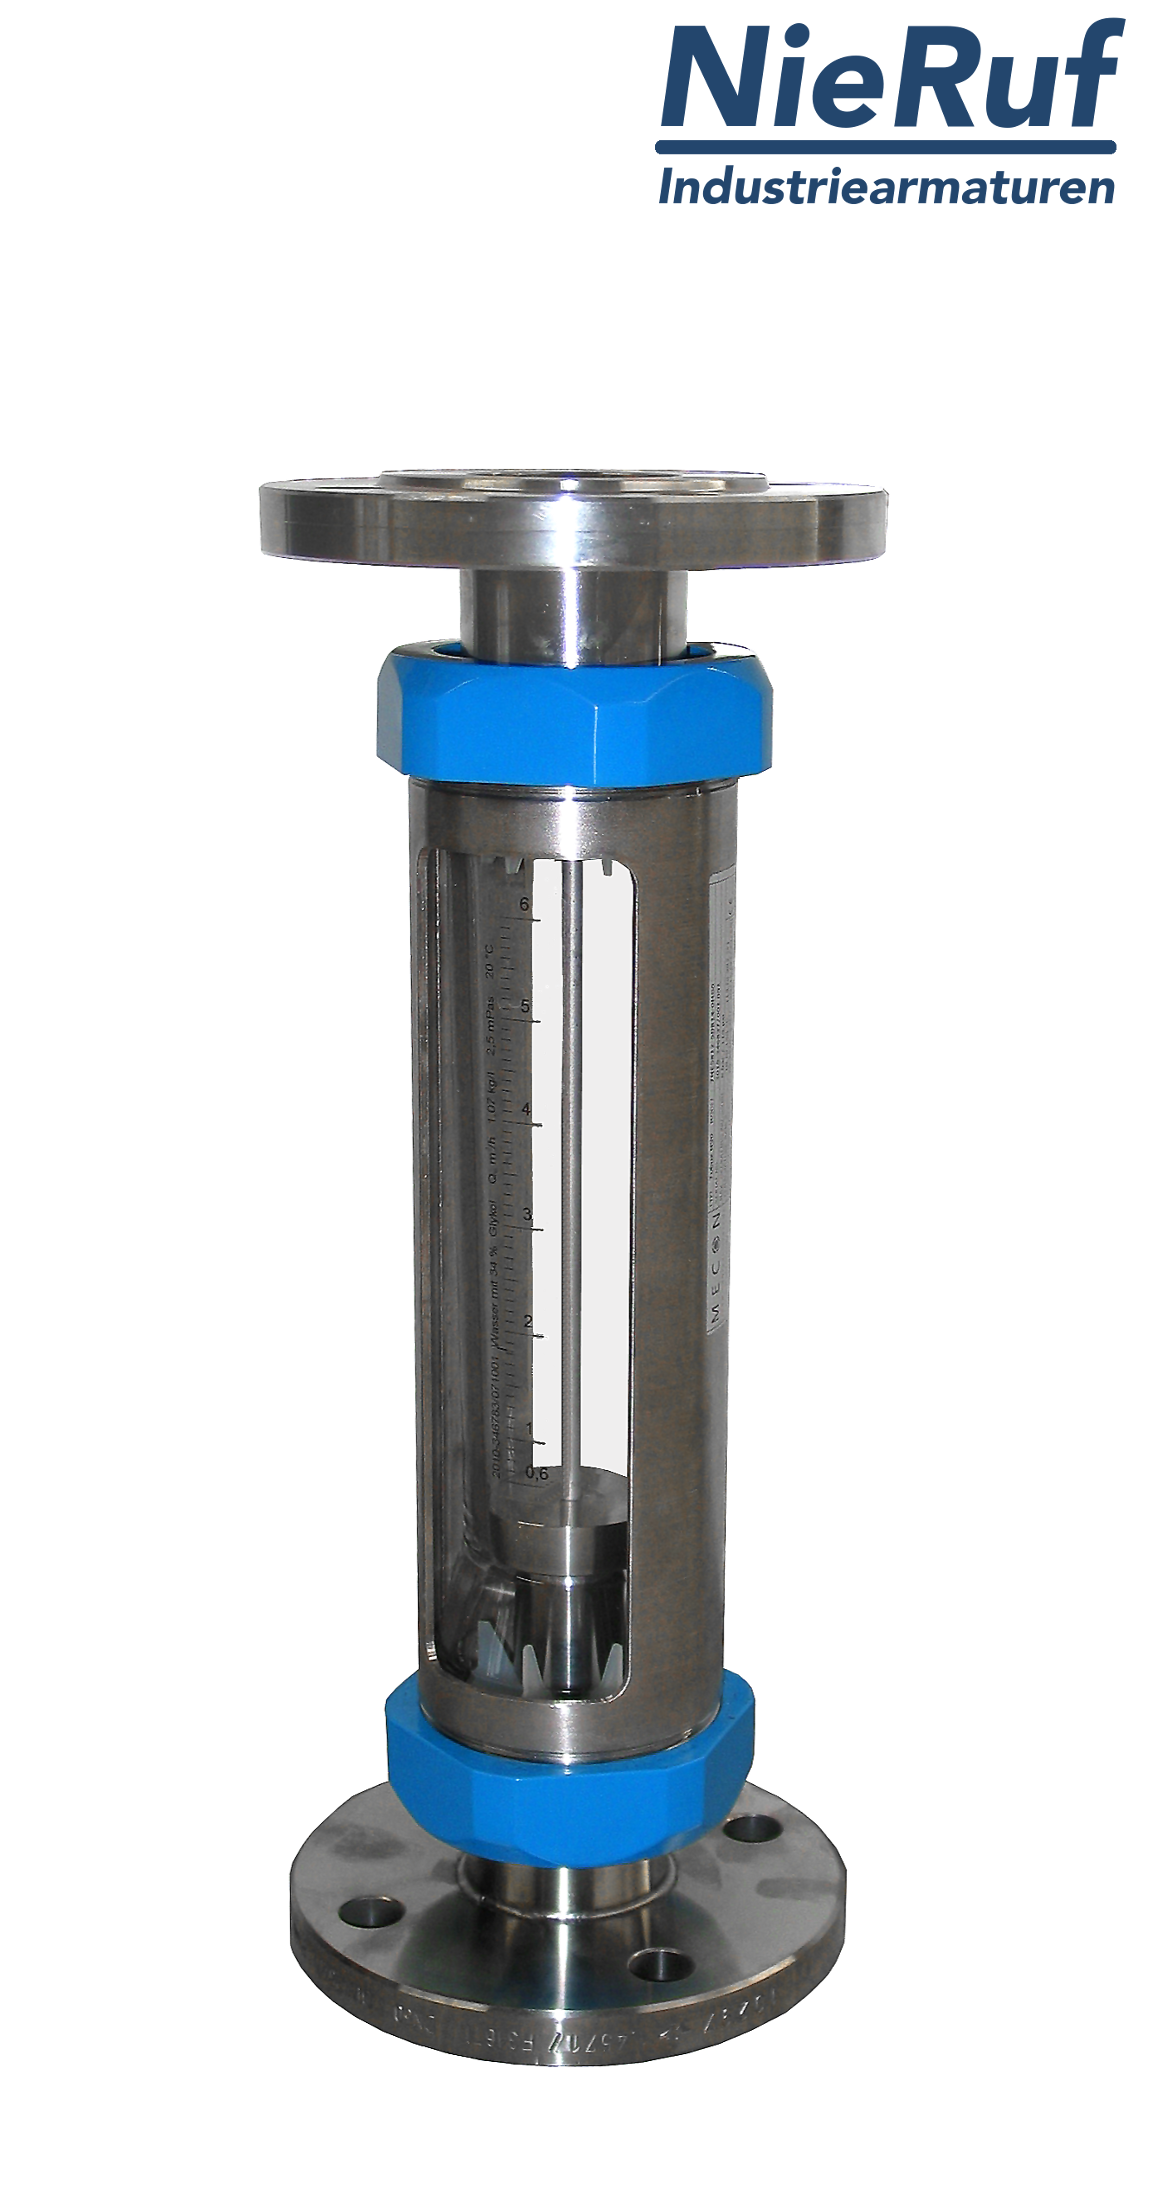 Variable area flowmeter stainless steel + borosilicate flange DN25 3.0 - 30.0 l/h water FKM